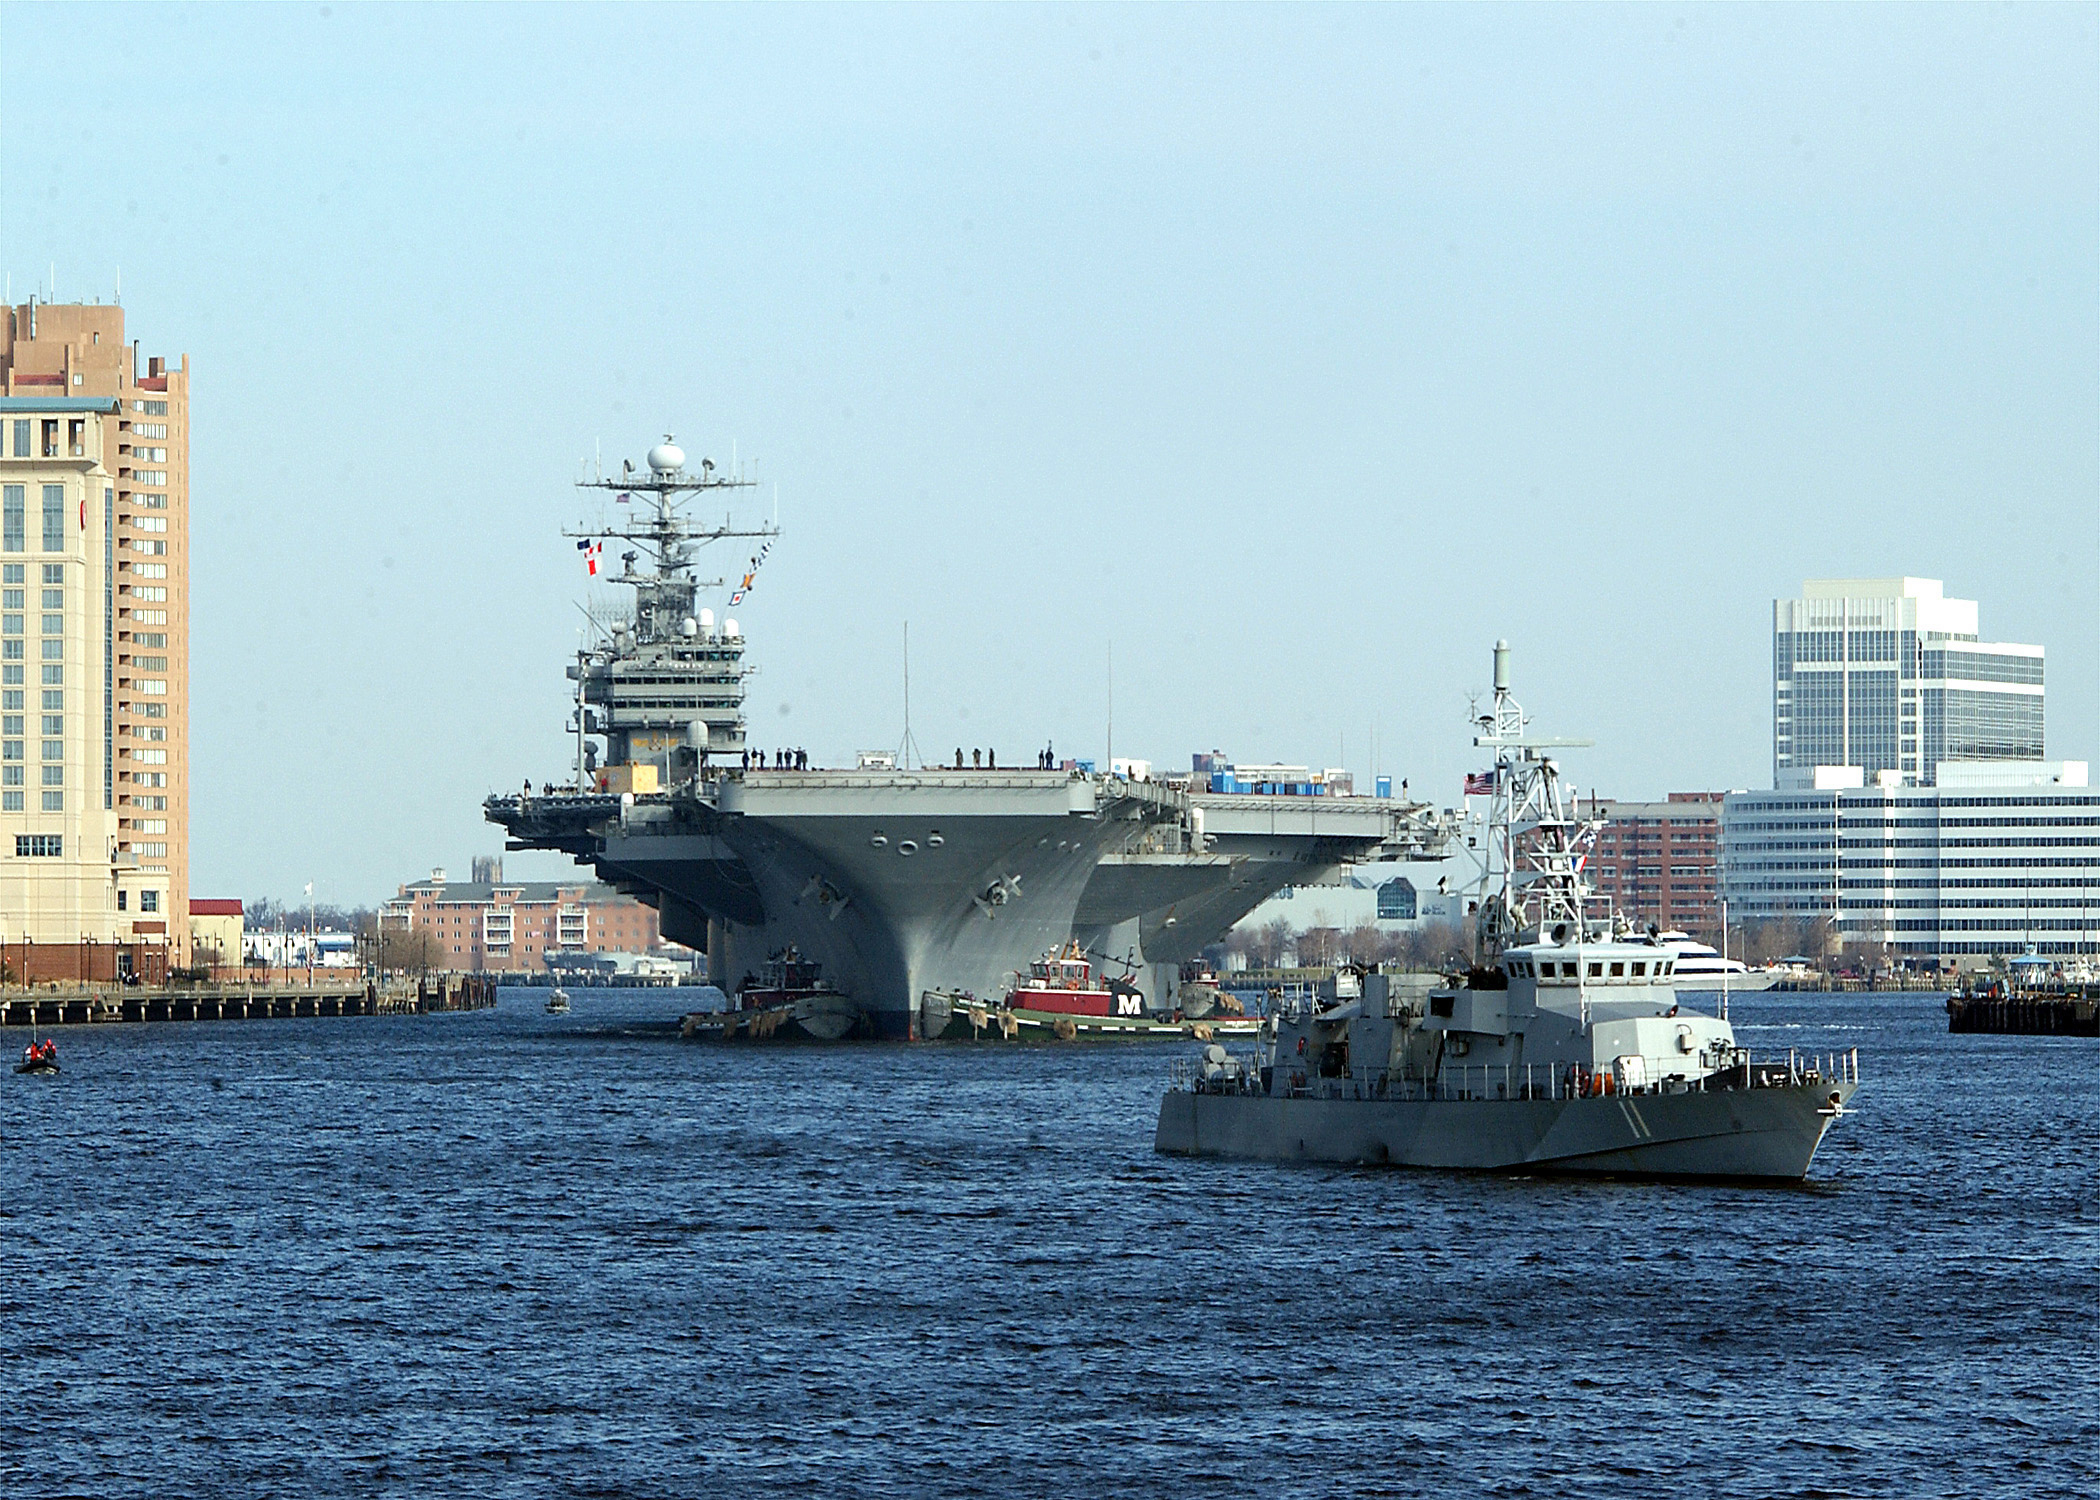 US Navy 030225-N-1743B-001 USS George Washington (CVN 73) passes by downtown Norfolk during her transit down the Elizabeth River